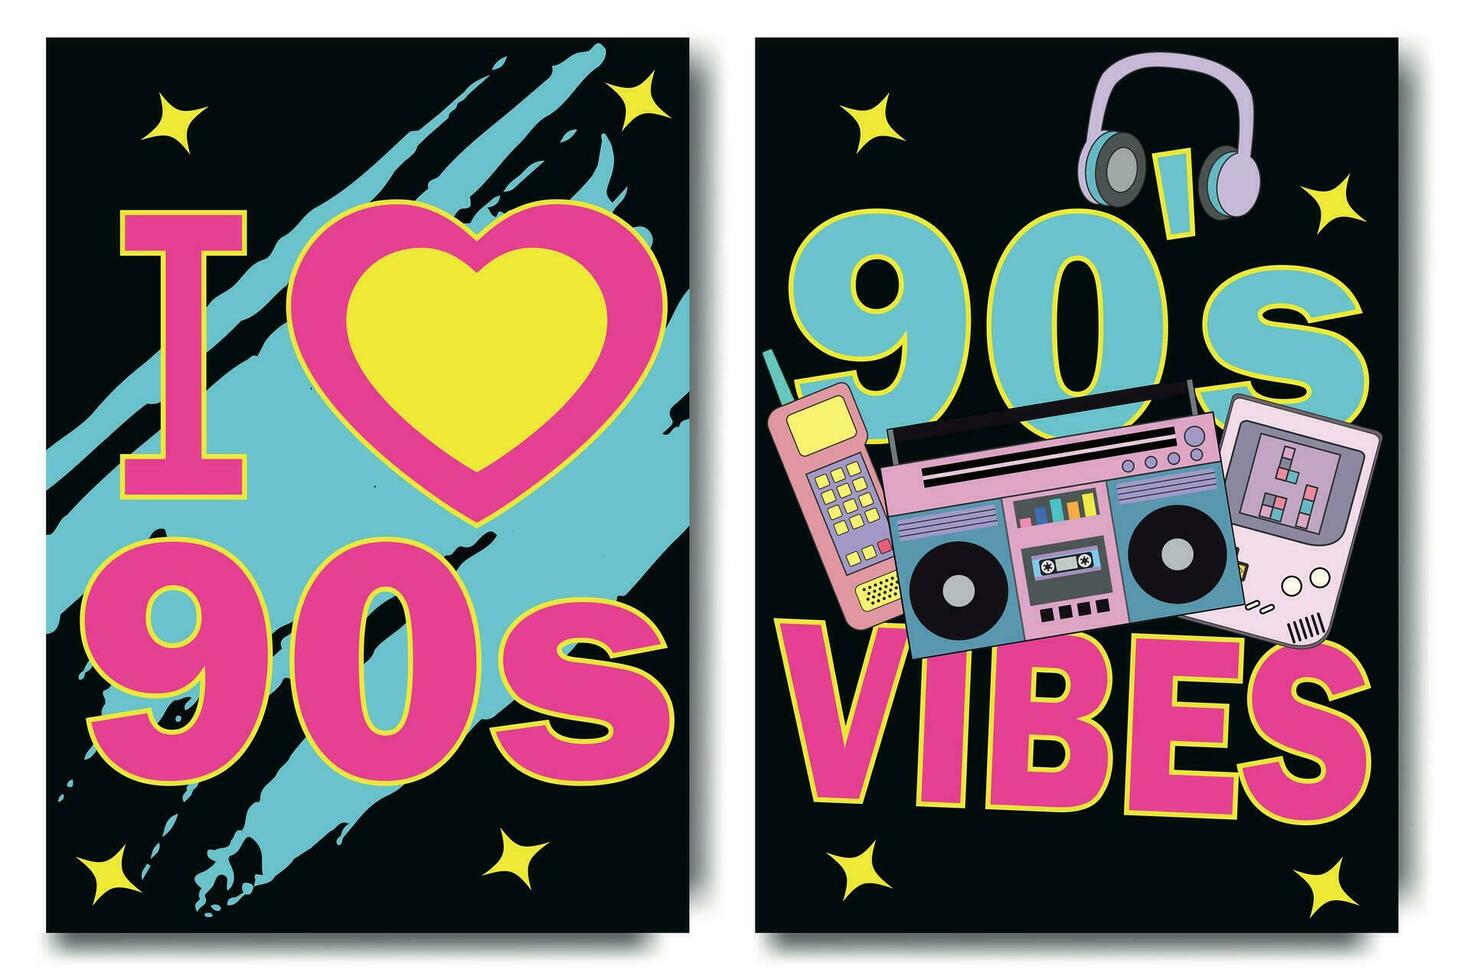 I Love 90s. Party 90s banner. 90's vibes graphic design template. Poster templates with happy nineties symbols, neo brutalism, gamepad and devices, headphones and other retro pop culture signs vector